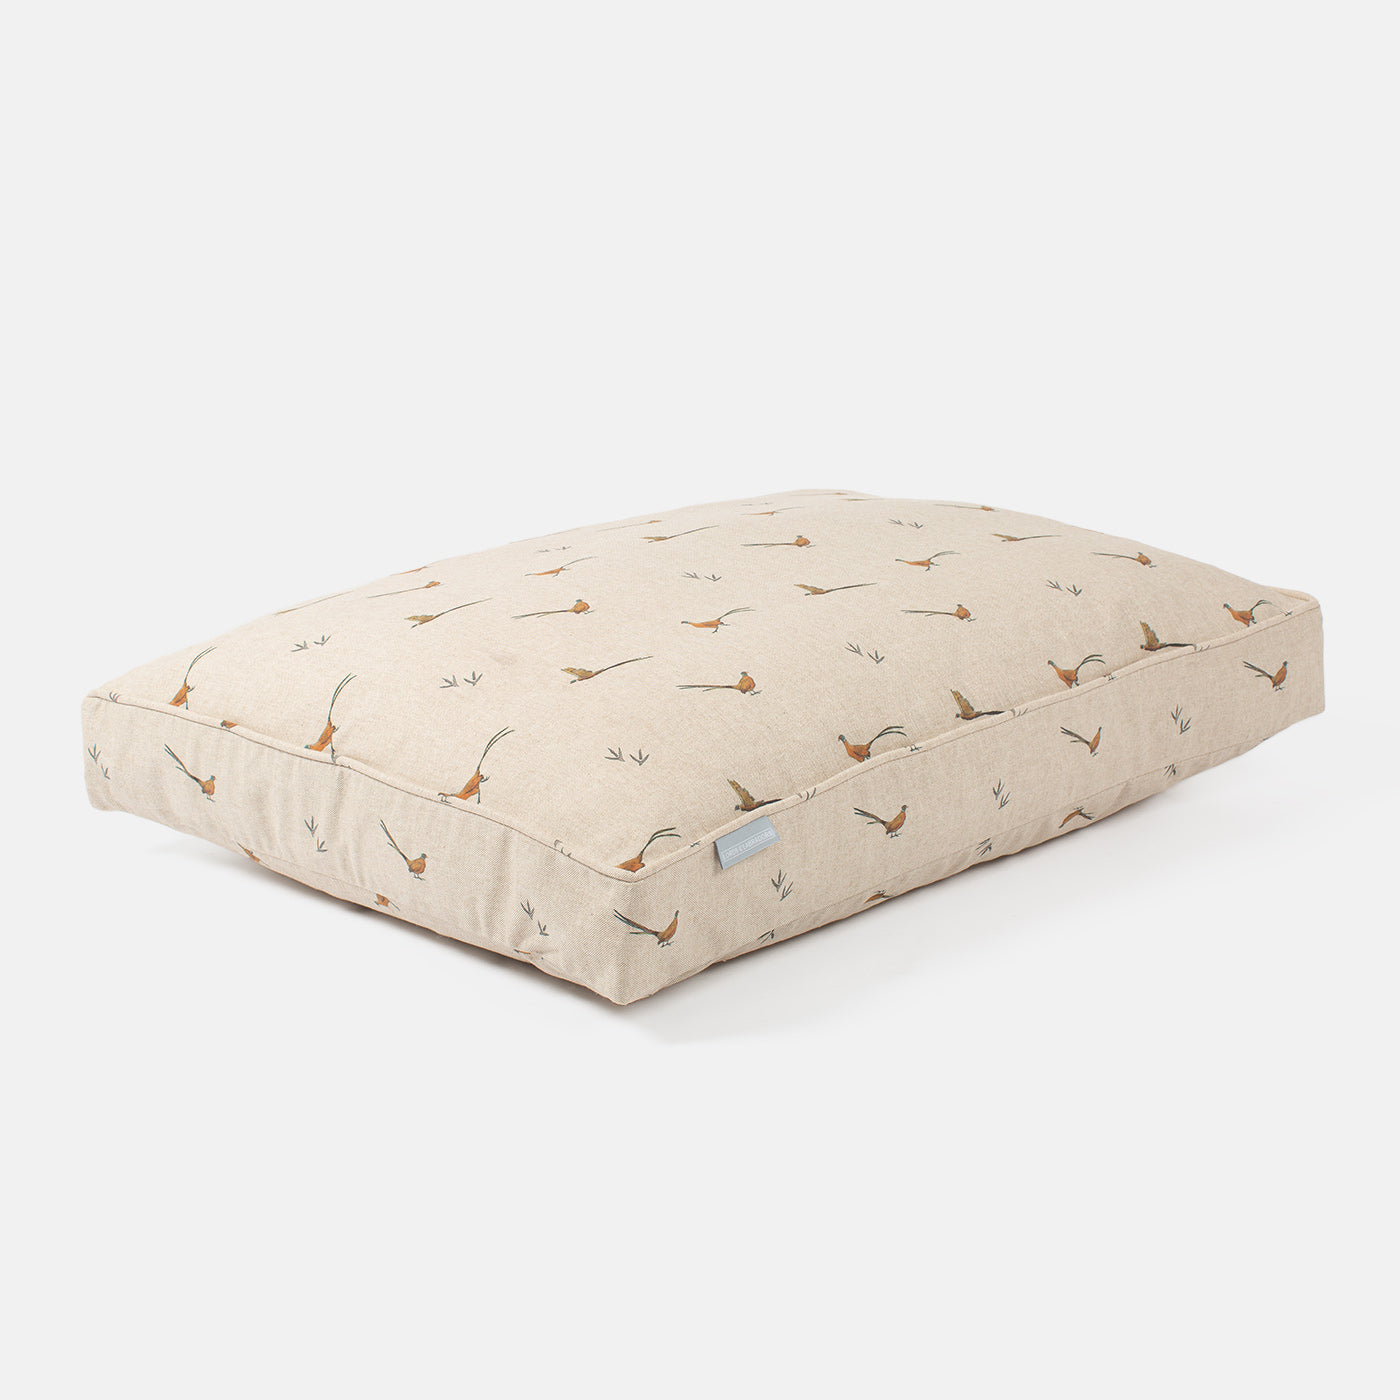 Luxury Dog Cushion, in Woodland Pheasant. Available For Pet Personalisation, Handmade Here at Lords & Labradors! Order The Perfect Pet Cushion Today For The Ultimate Burrow!